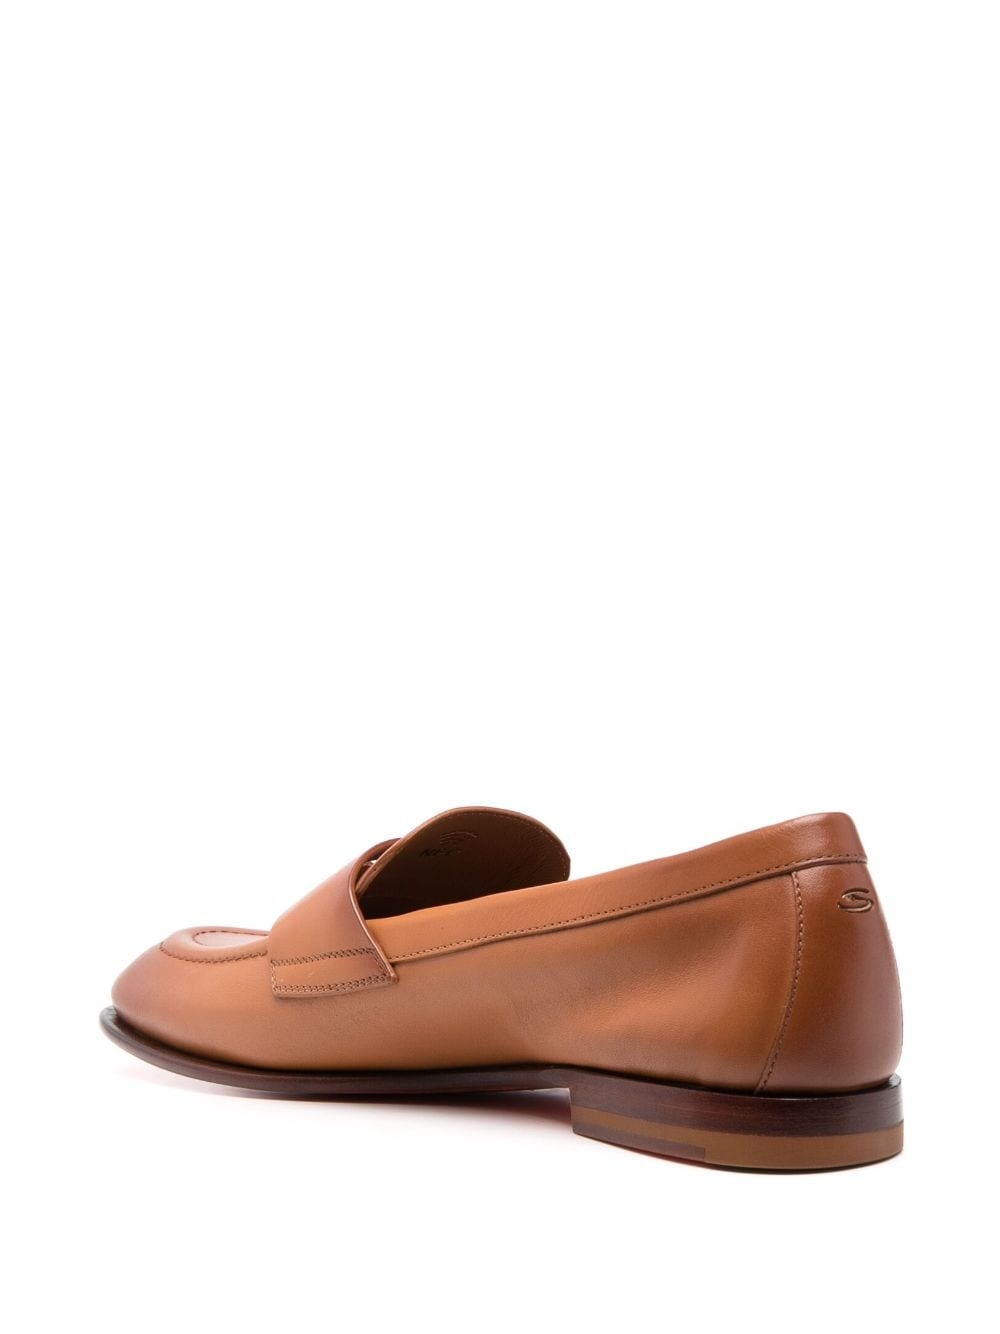 flat-sole leather loafers - 3